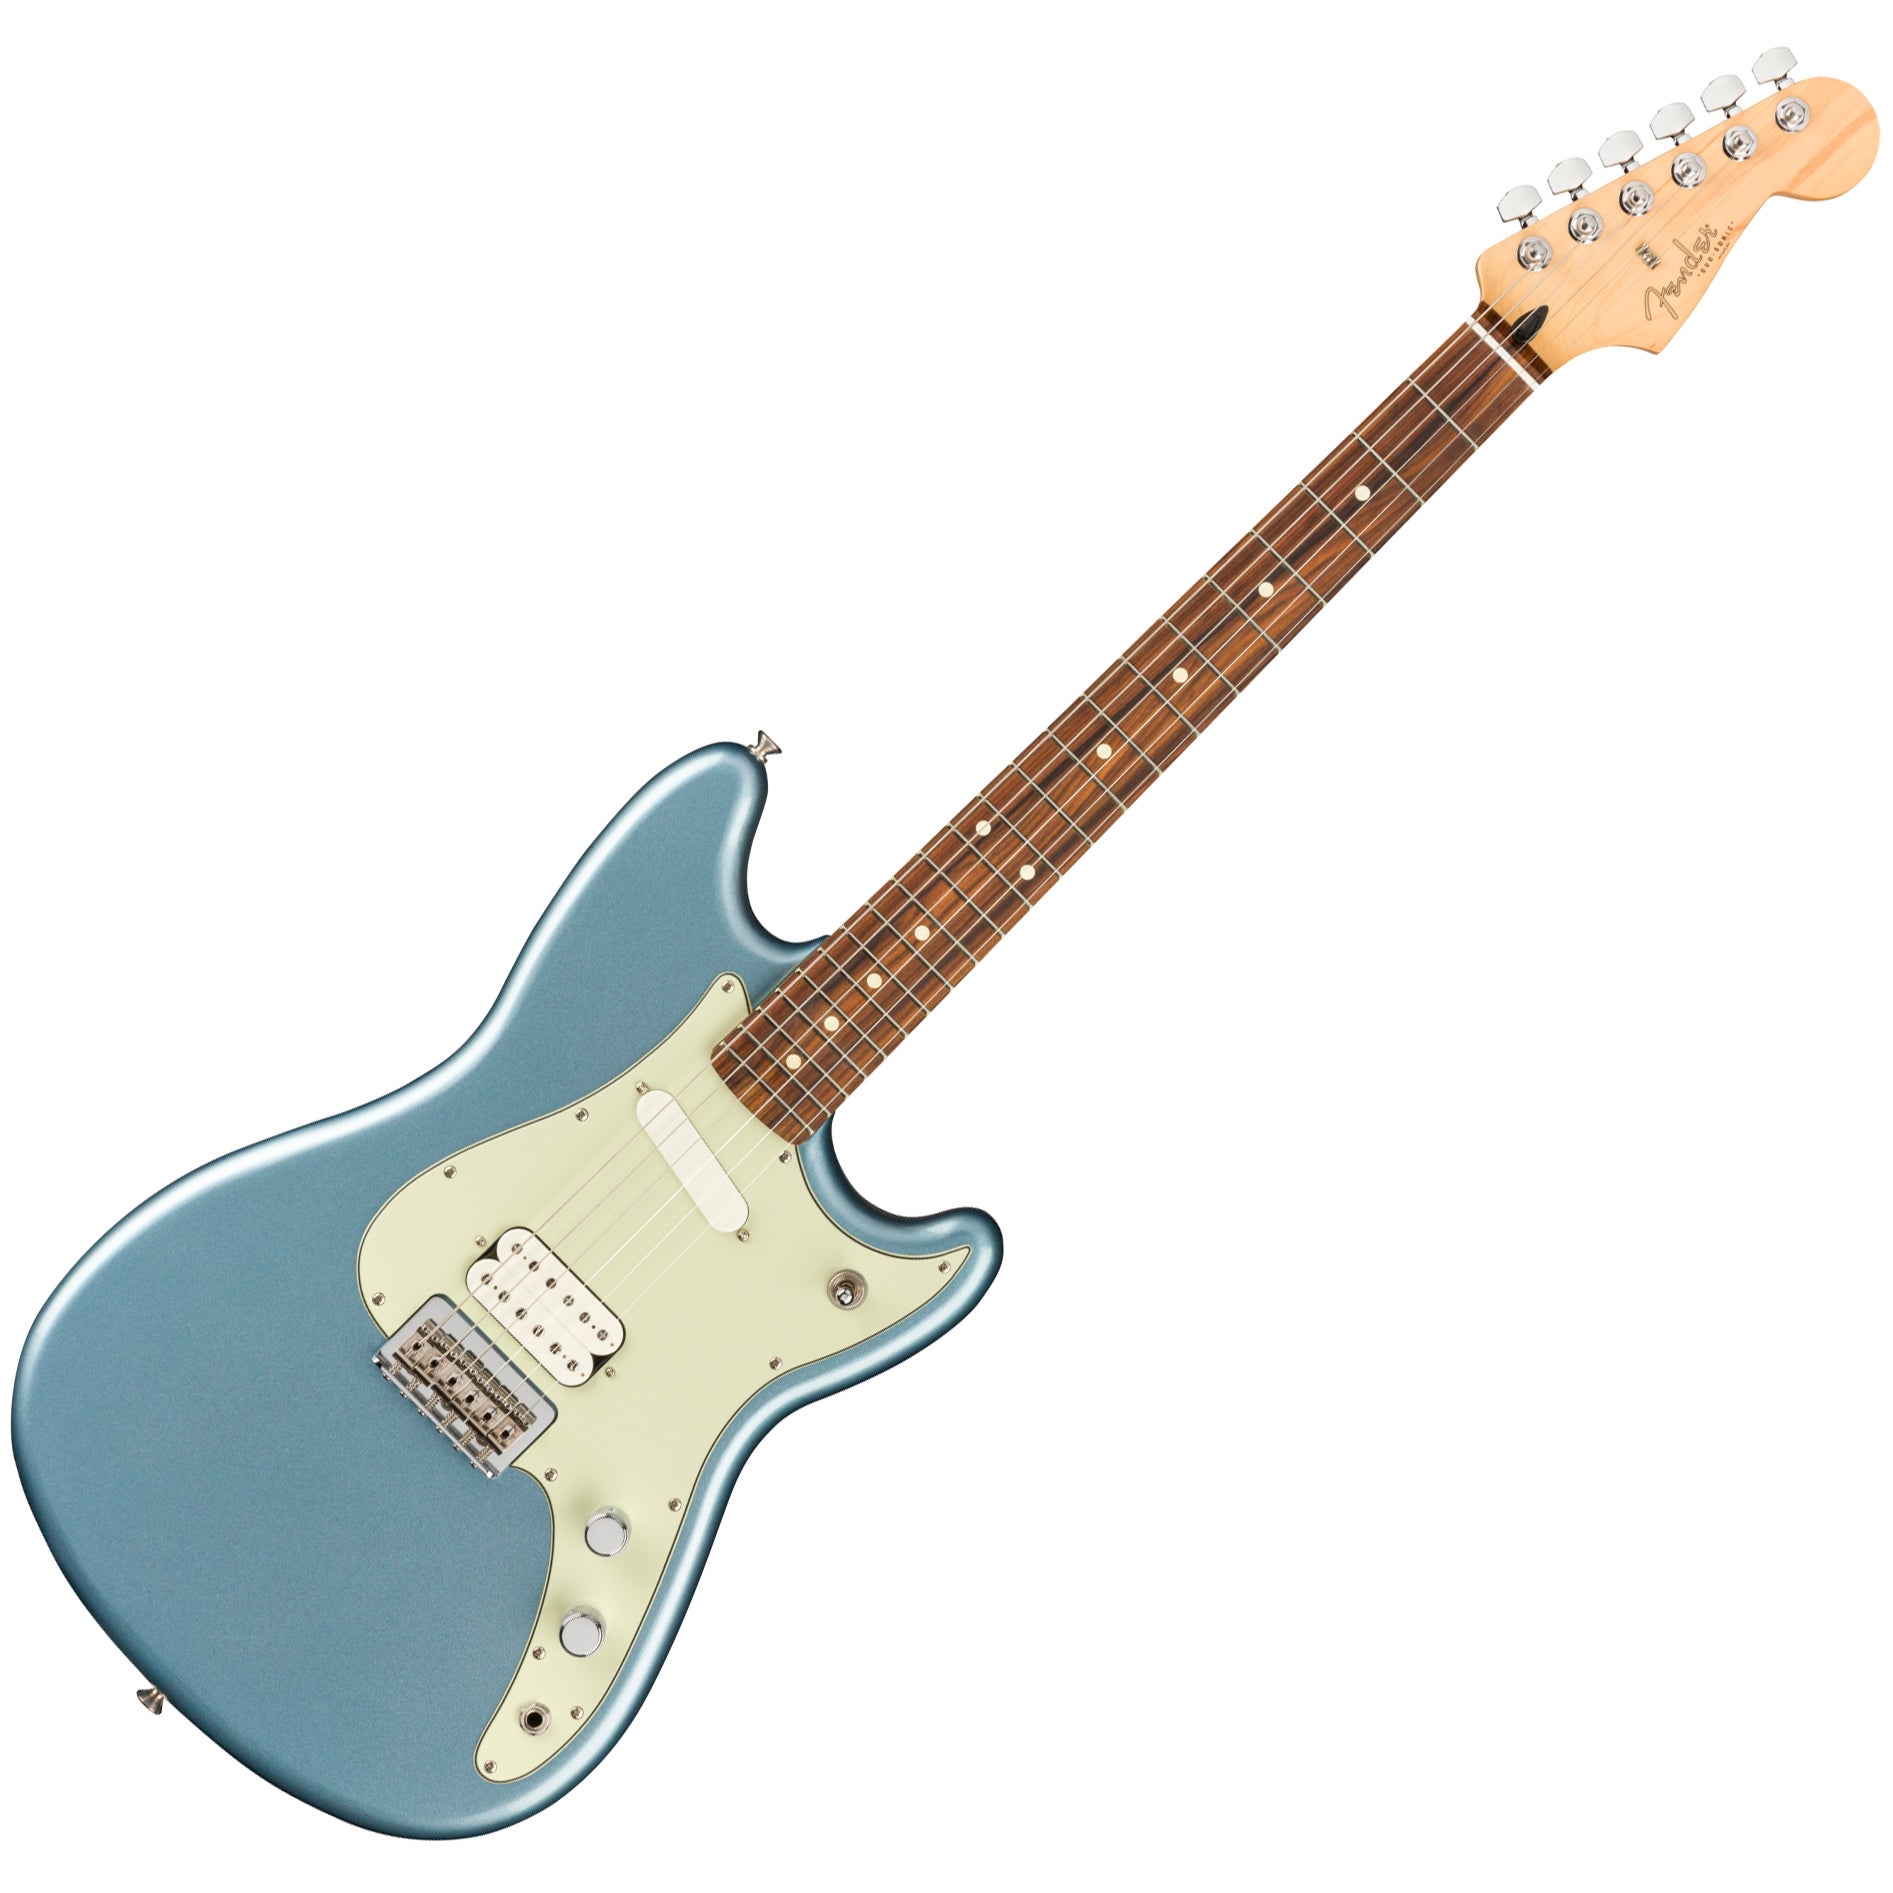 Fender 0144023583 Player Duo-sonic Hs Electric Guitar - Ice Blue 